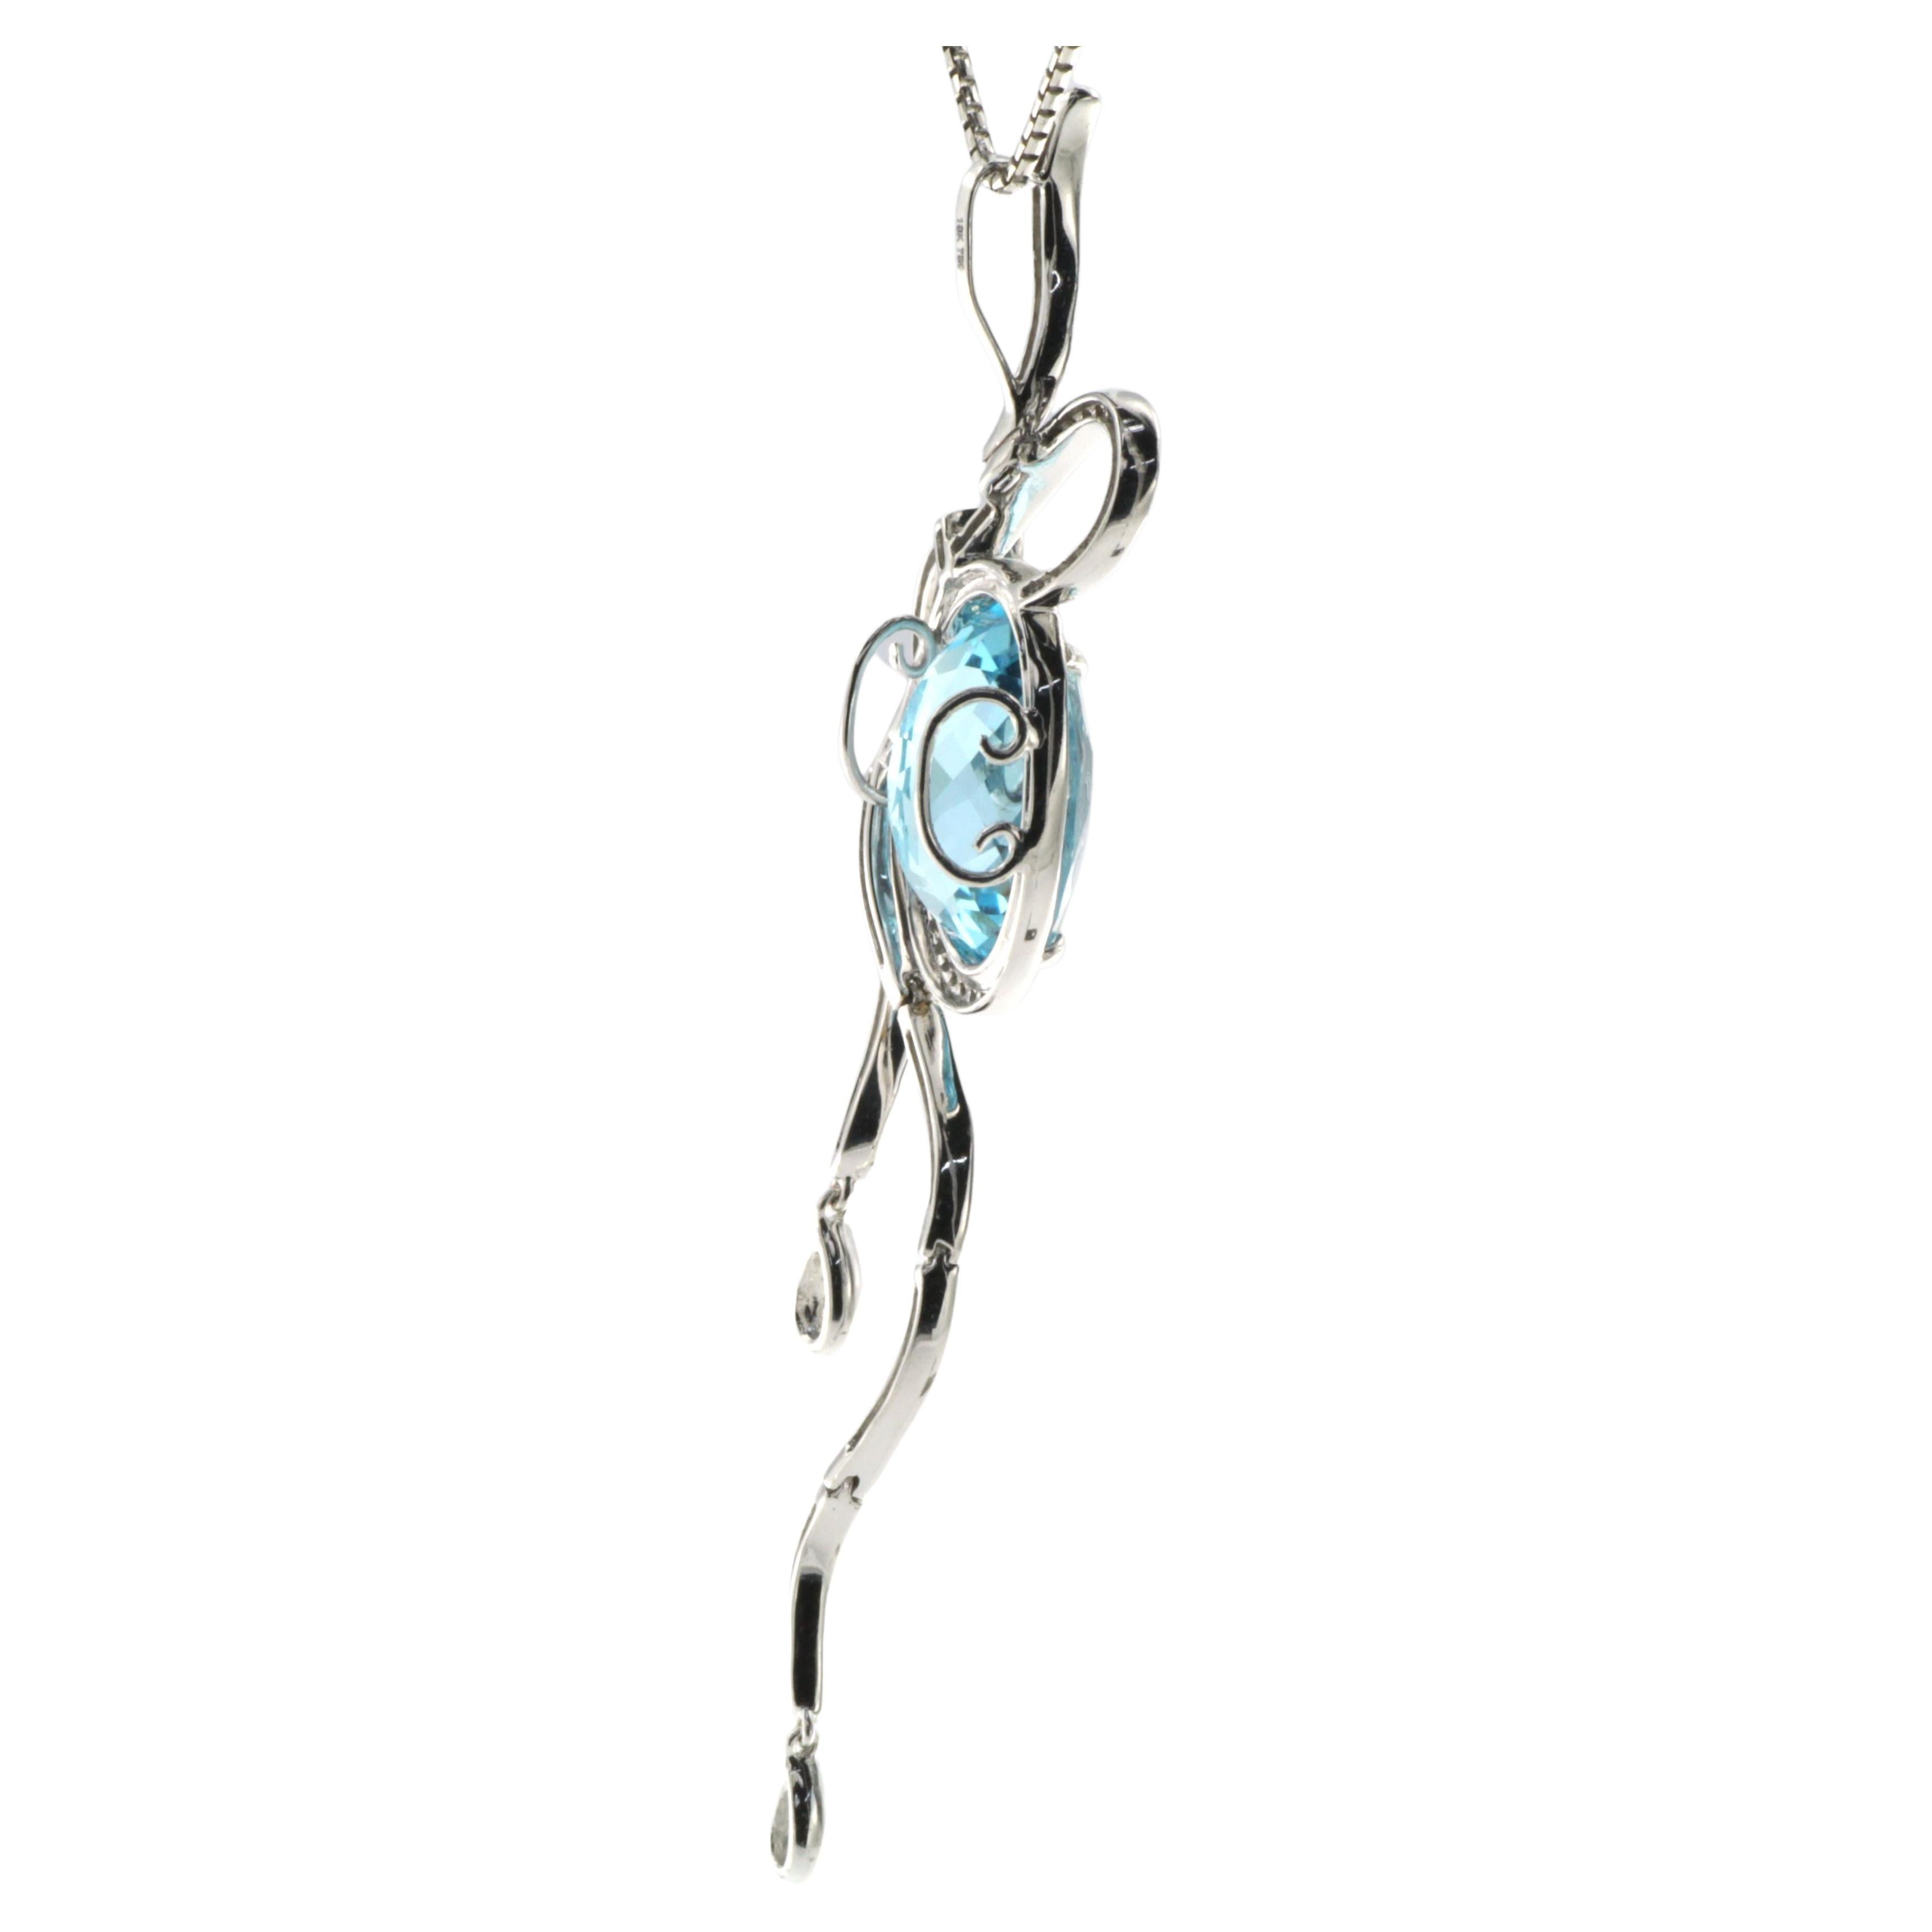 This pendant features 11.18 carat of oval shape blue topaz, the blue topaz is surrounded by a diamond halo. The diamonds and 18 karat white gold also form a ribbon attached to the center blue topaz. Total carat weight 0.76 carat of white round